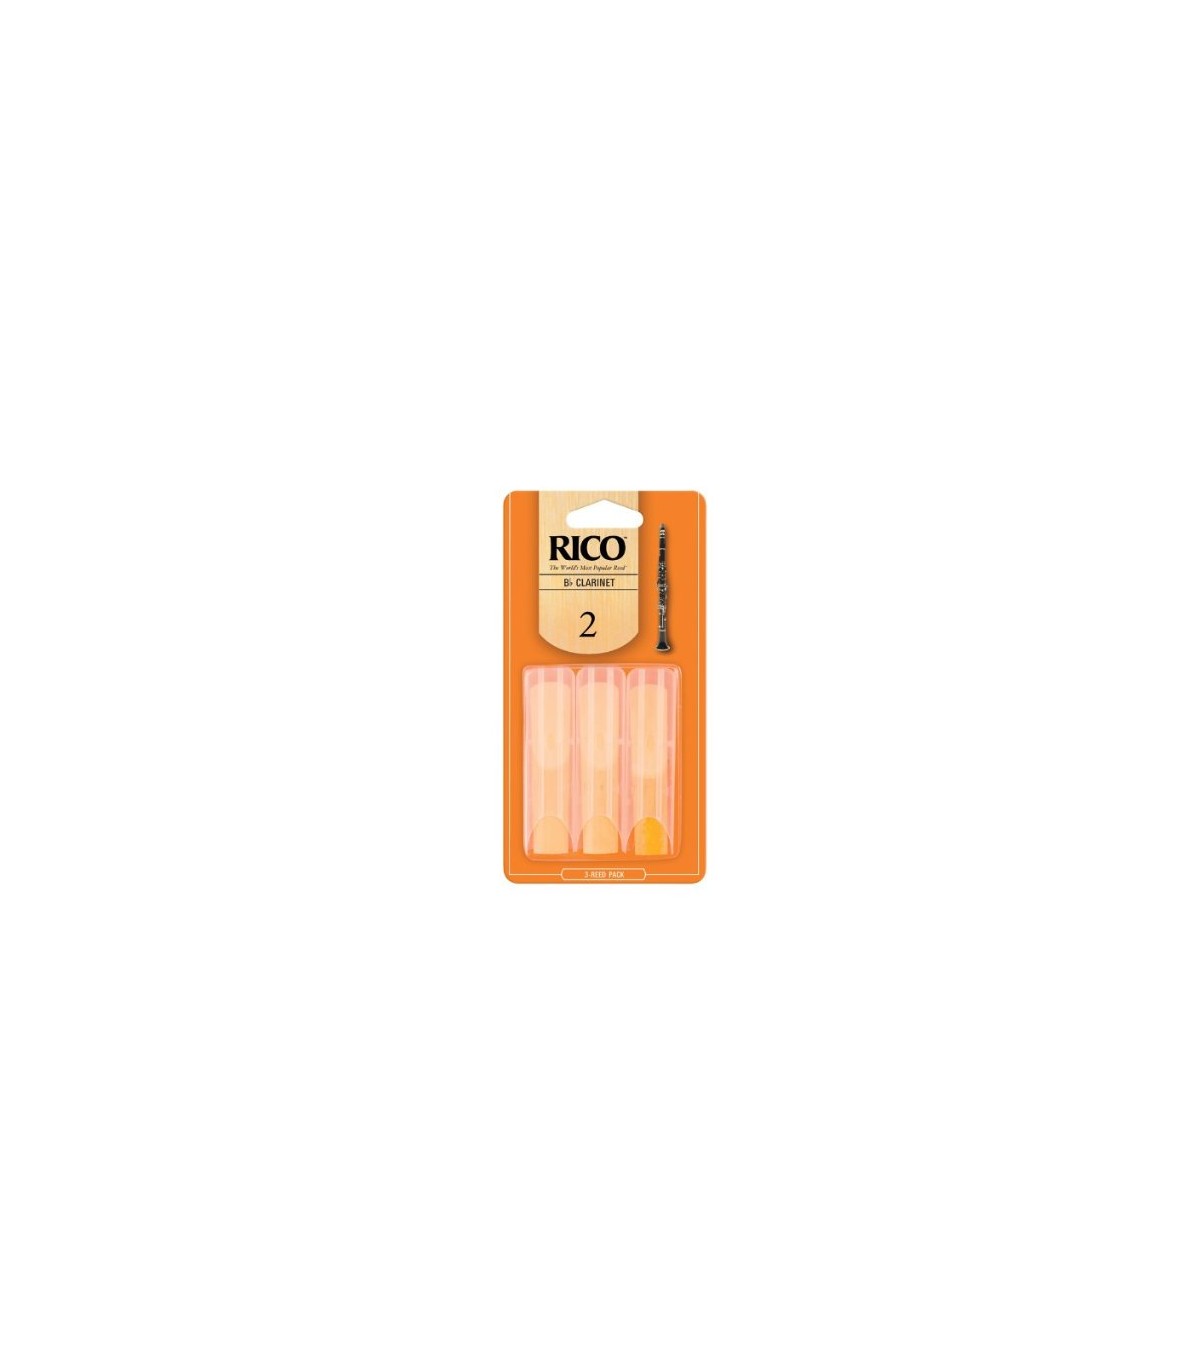 RCA0320 Strength 2.0 D’Addario Woodwinds Rico Bb Clarinet Reeds 3-pack 